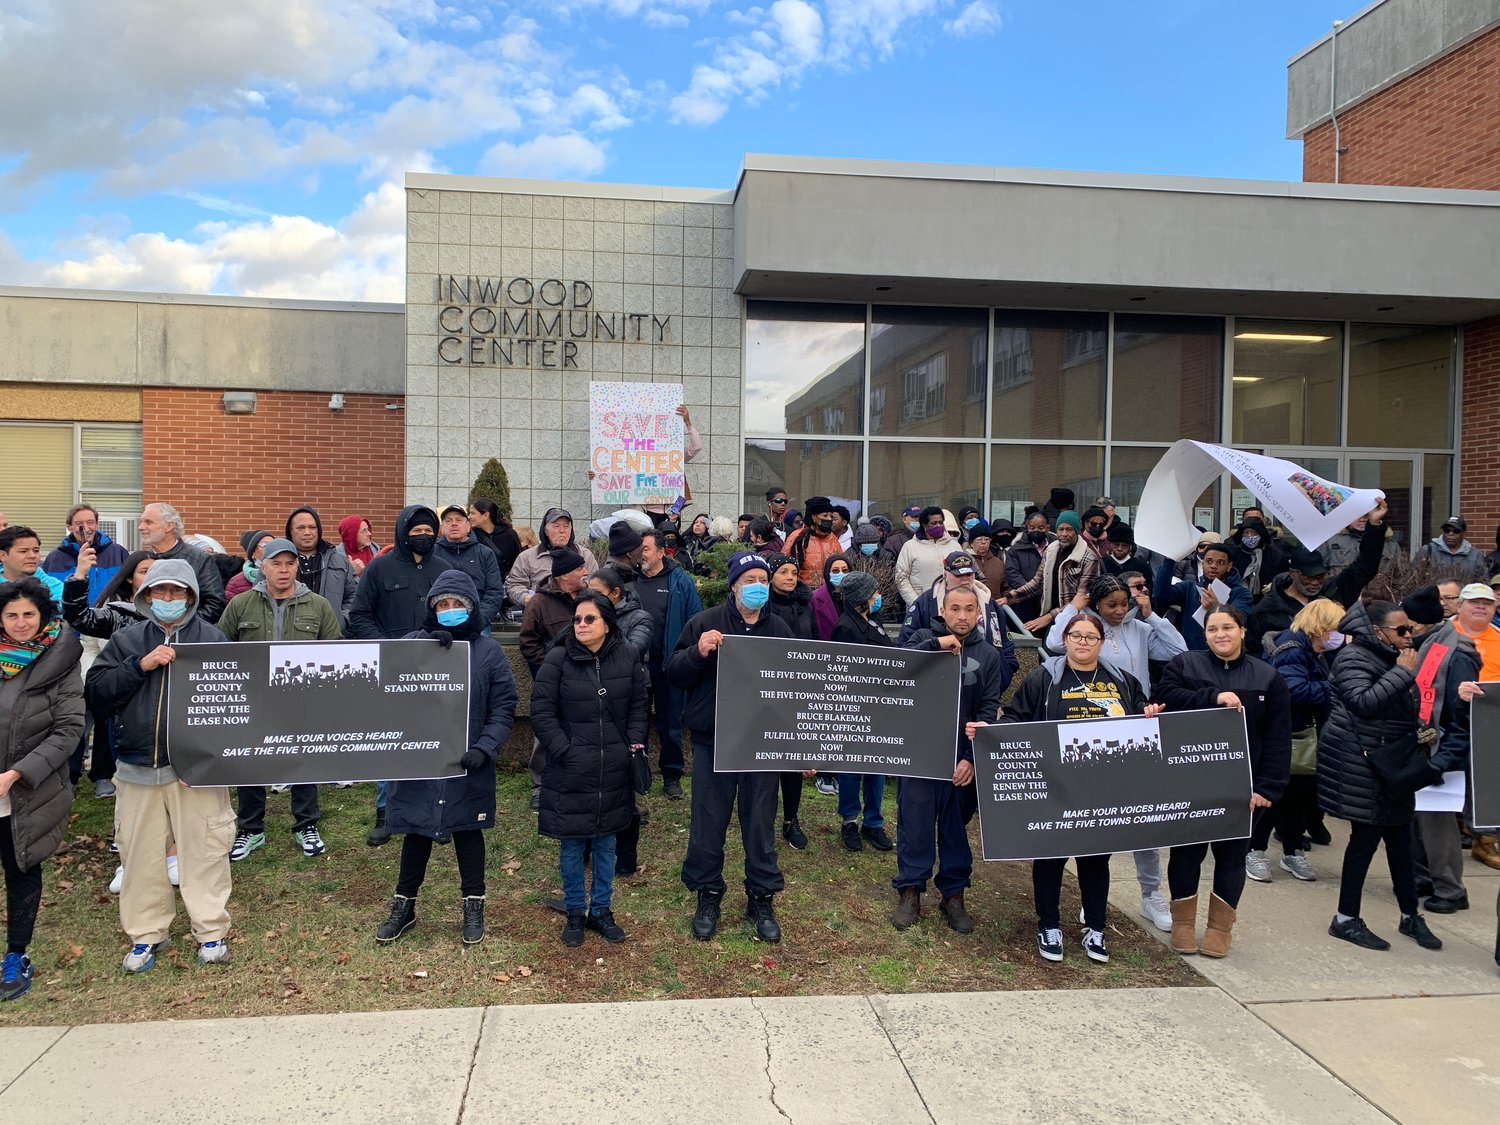 Workers, volunteers and community members of the Five Towns Community Center rallied on Jan. 20 to urge Nassau County to resign the center's lease.